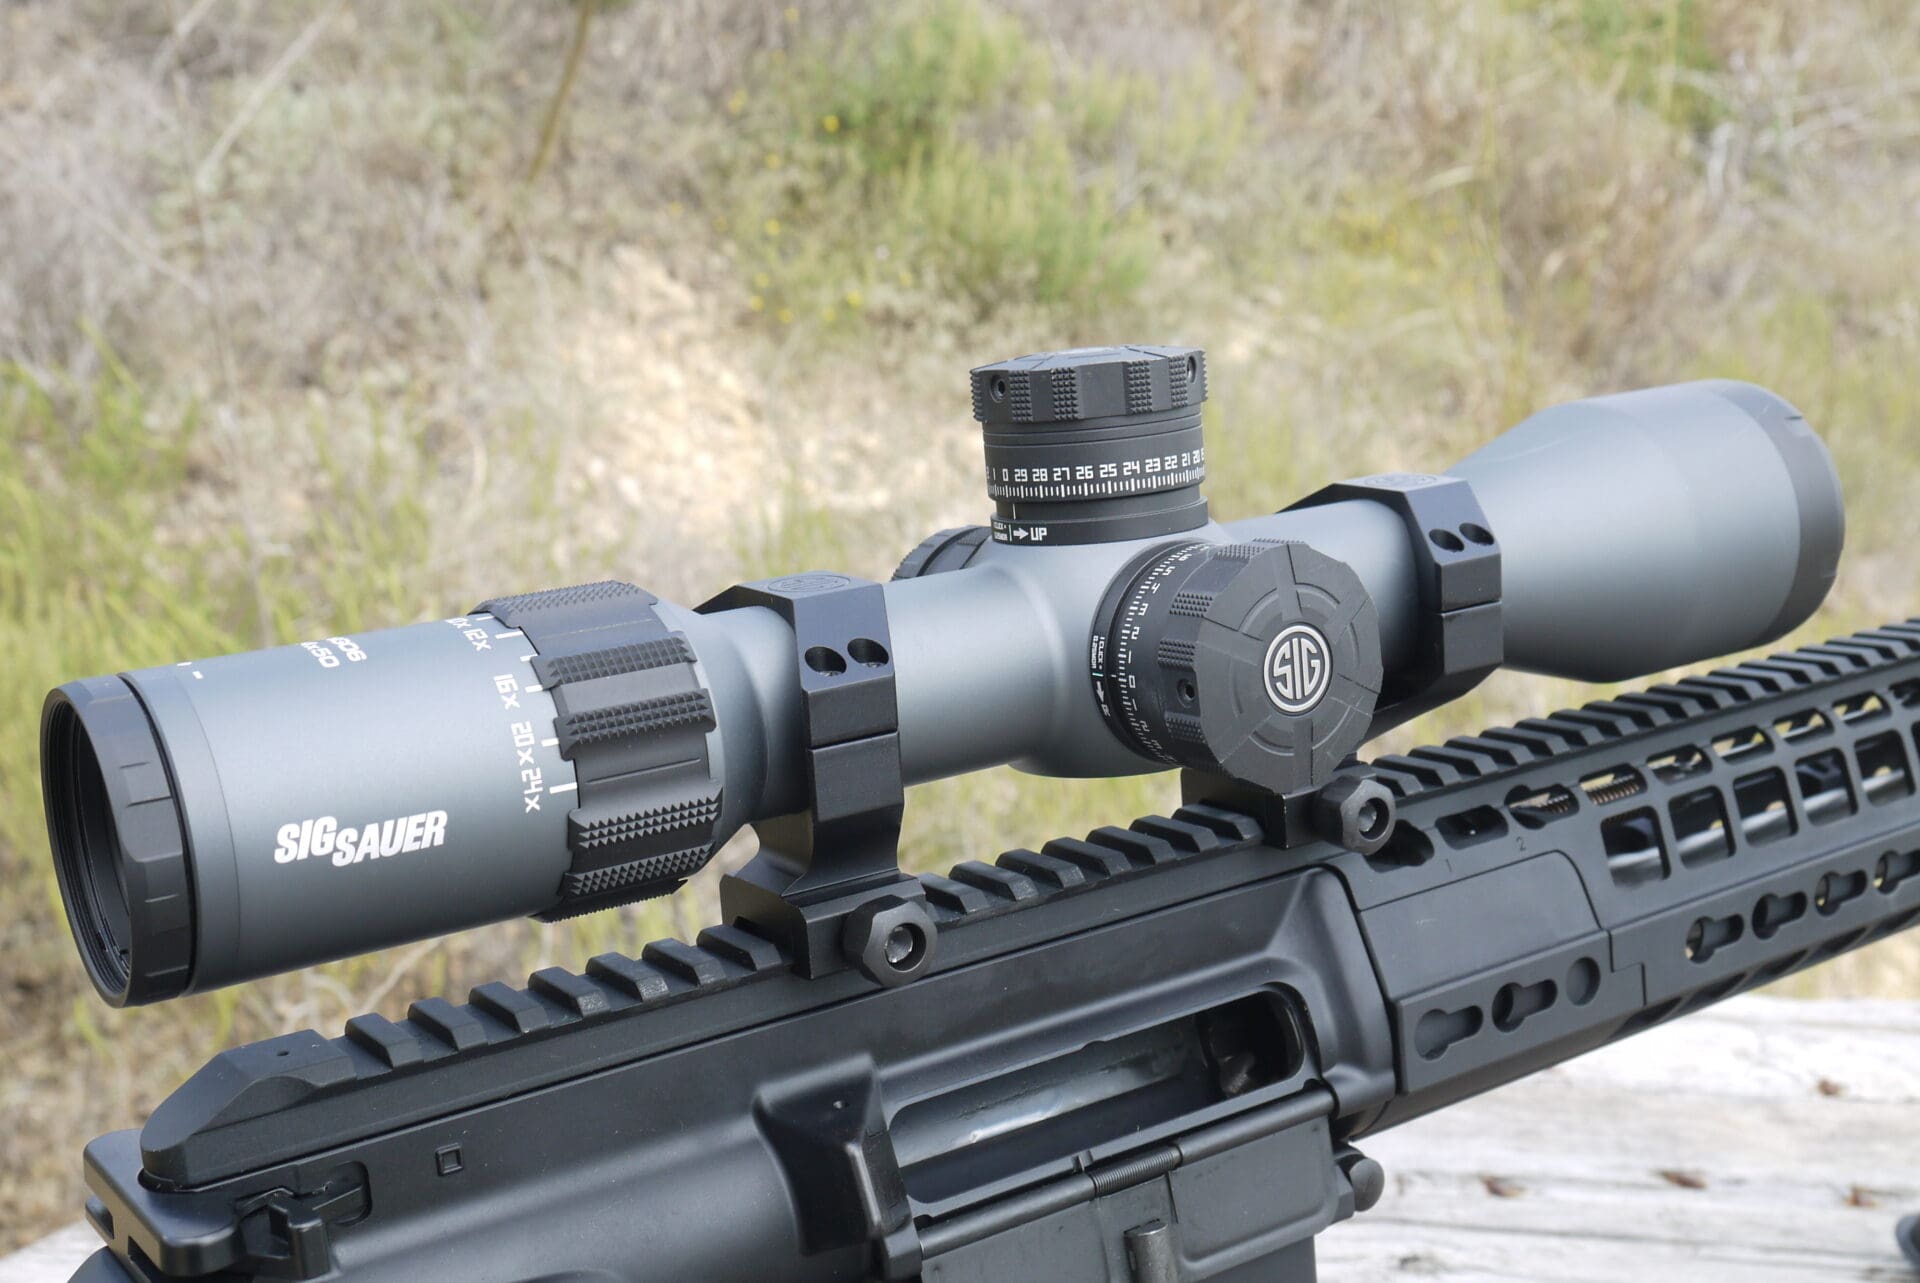 Scope Review Sig Sauer Tango6 4 24x50 The Truth About Guns